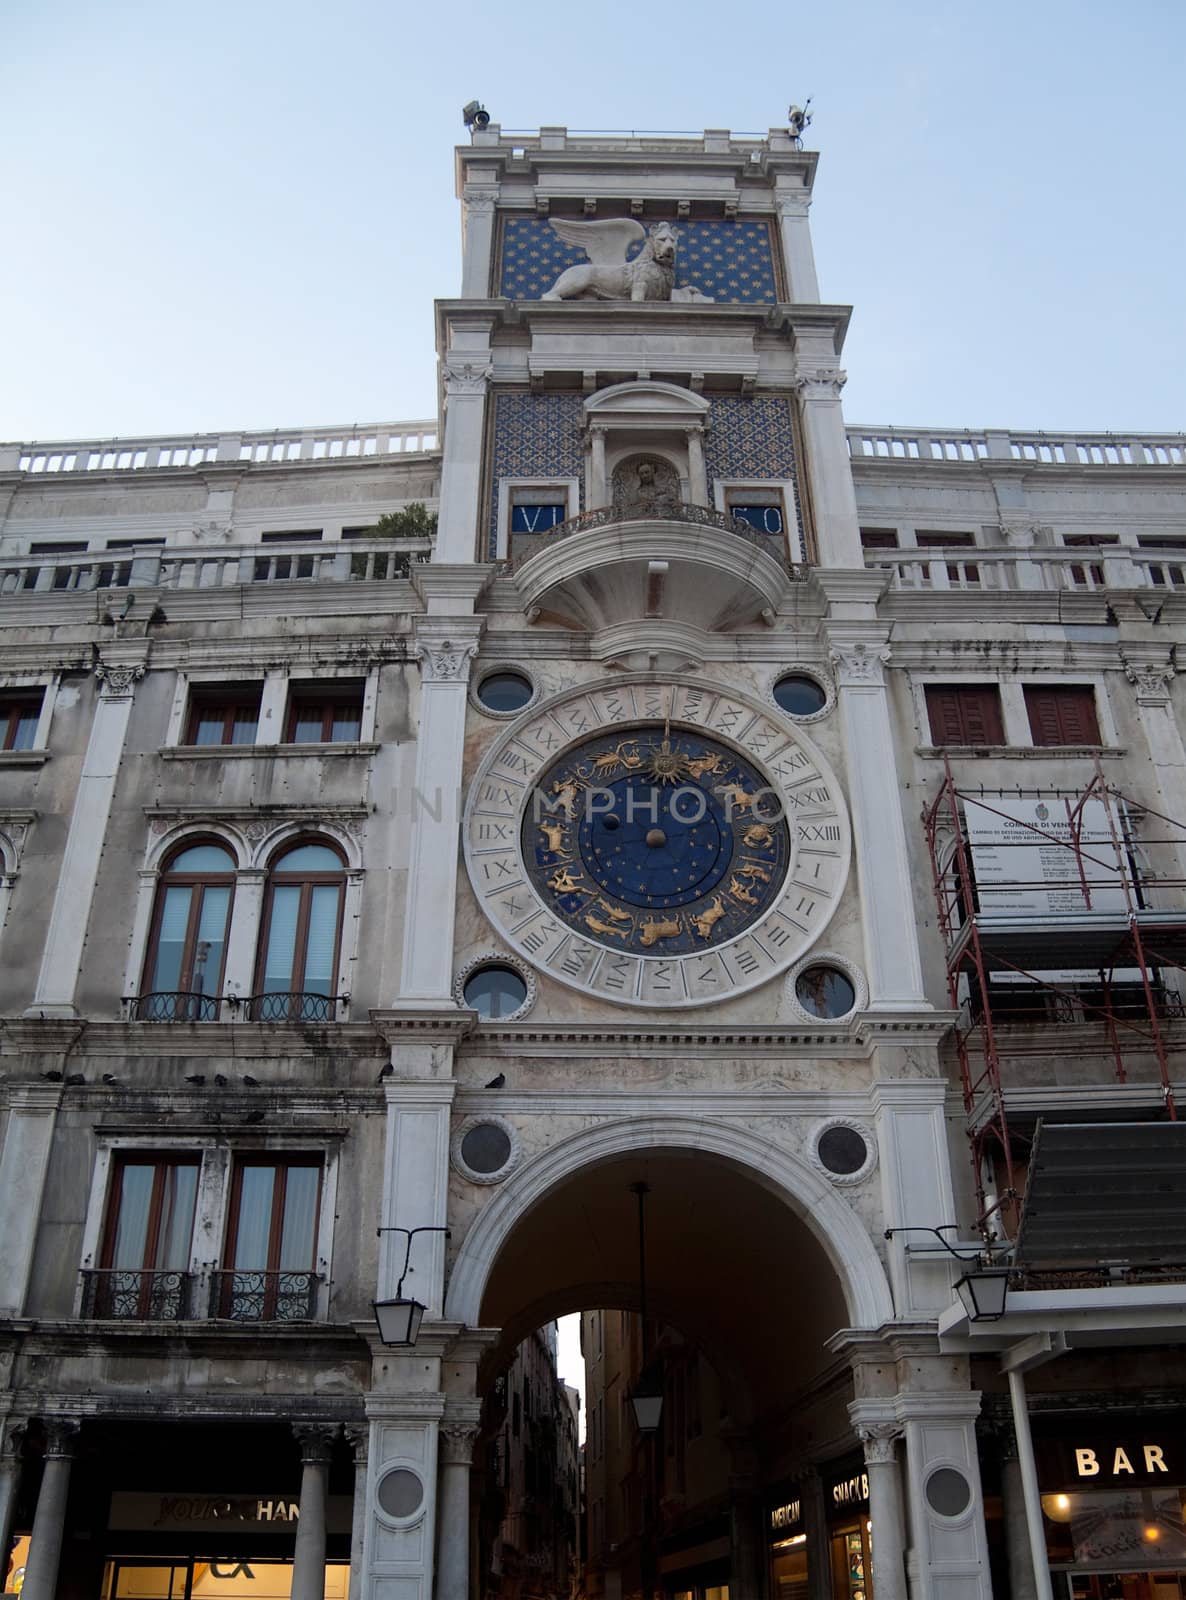 An old clock tower in Venice, Italy